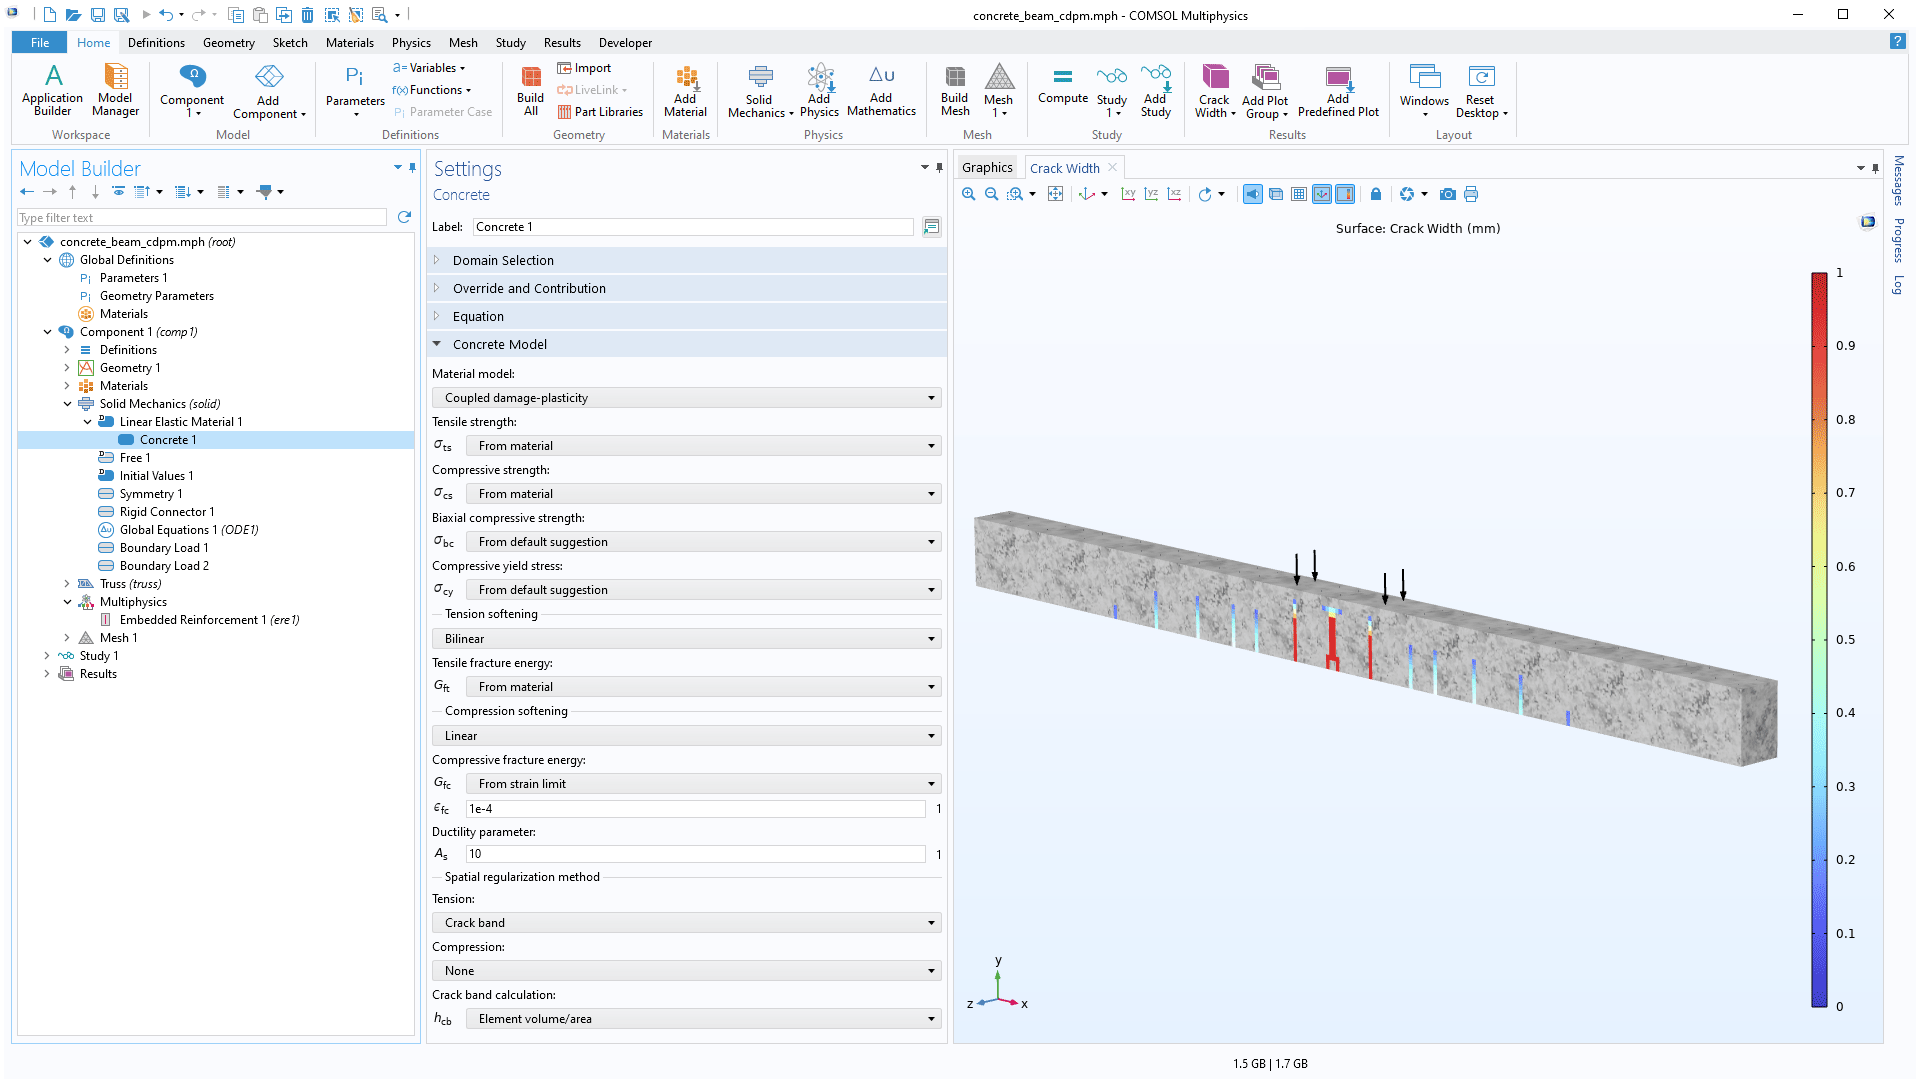 The COMSOL Multiphysics UI showing the Model Builder with the Concrete node highlighted, the corresponding Settings window, and a concrete beam in the Graphics window.